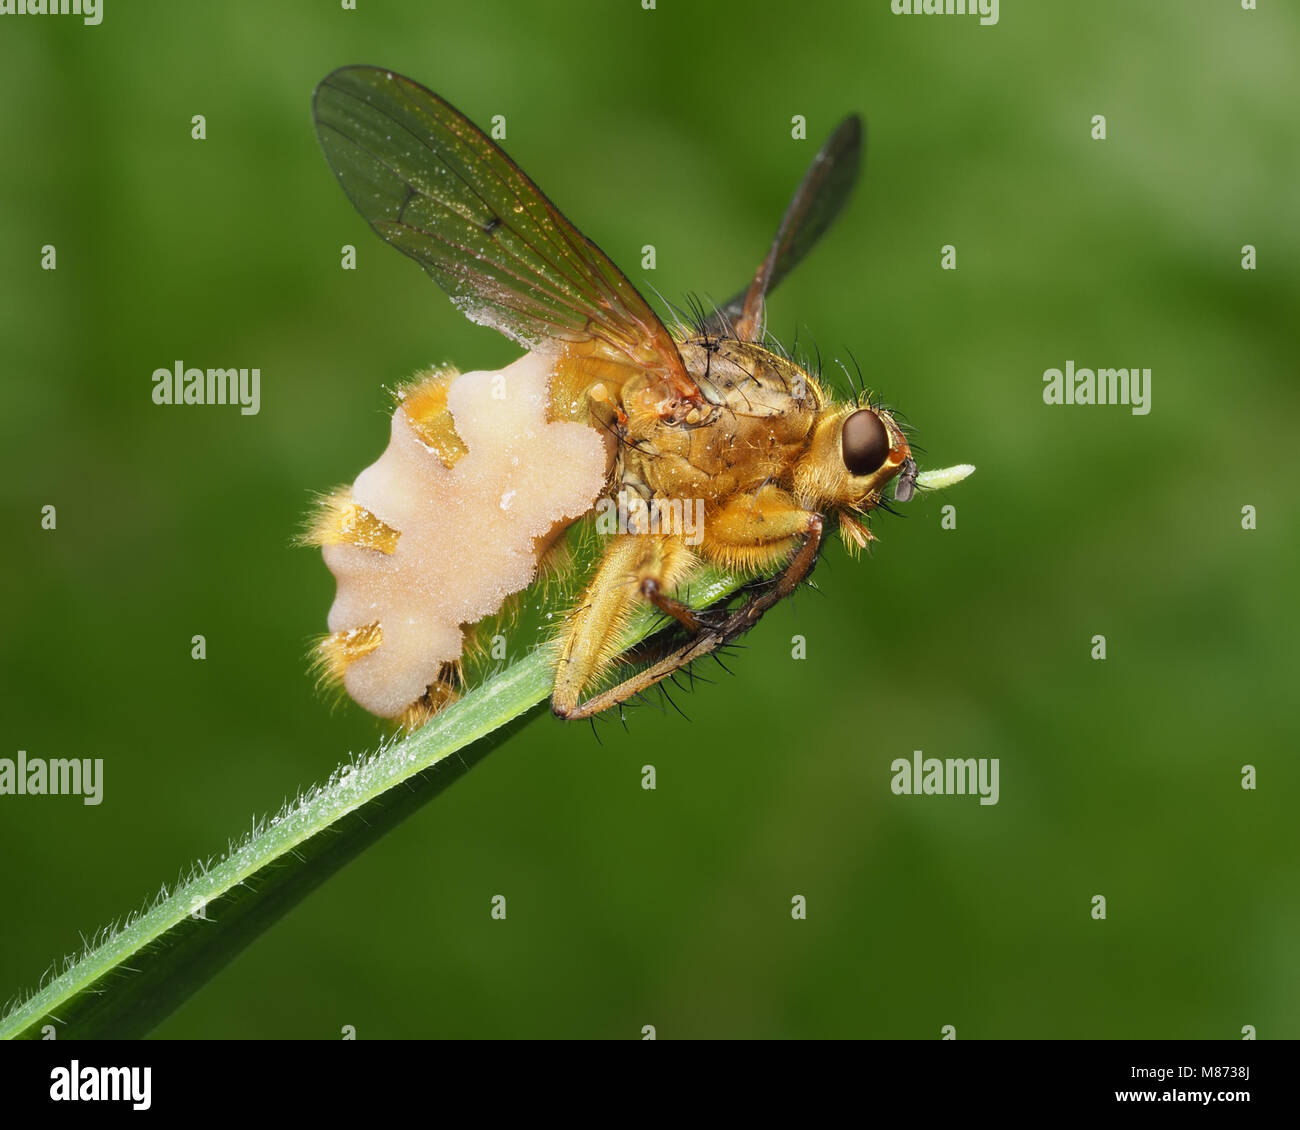 Yellow Dung Fly (Scathophaga stercoraria) infected with fungus (Entomophthora sp.) on the top of a blade of grass. Tipperary, Ireland Stock Photo